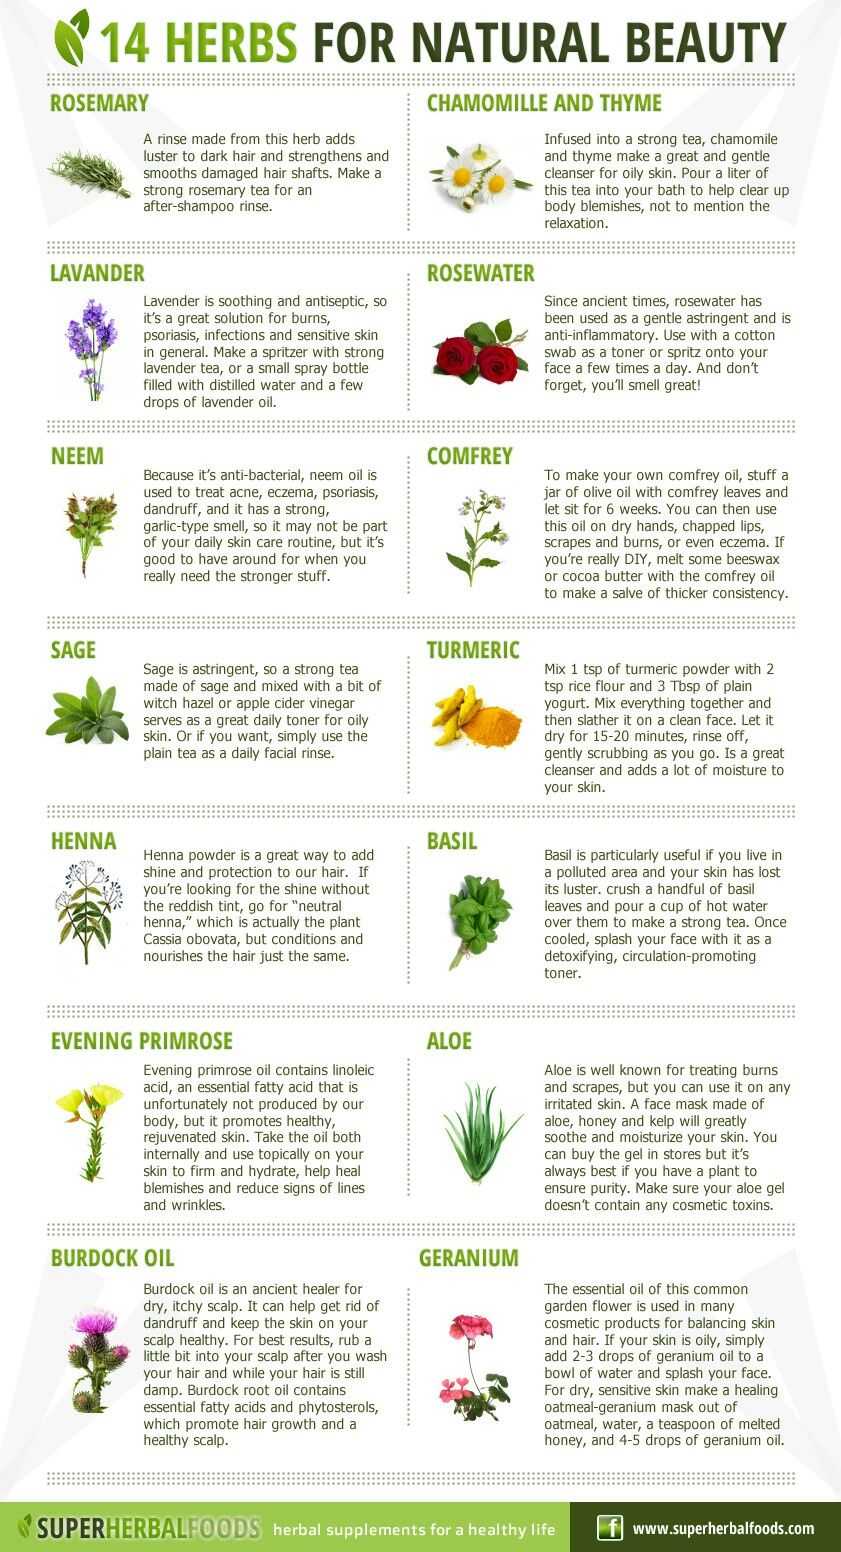 14 Herbs For Natural Beauty